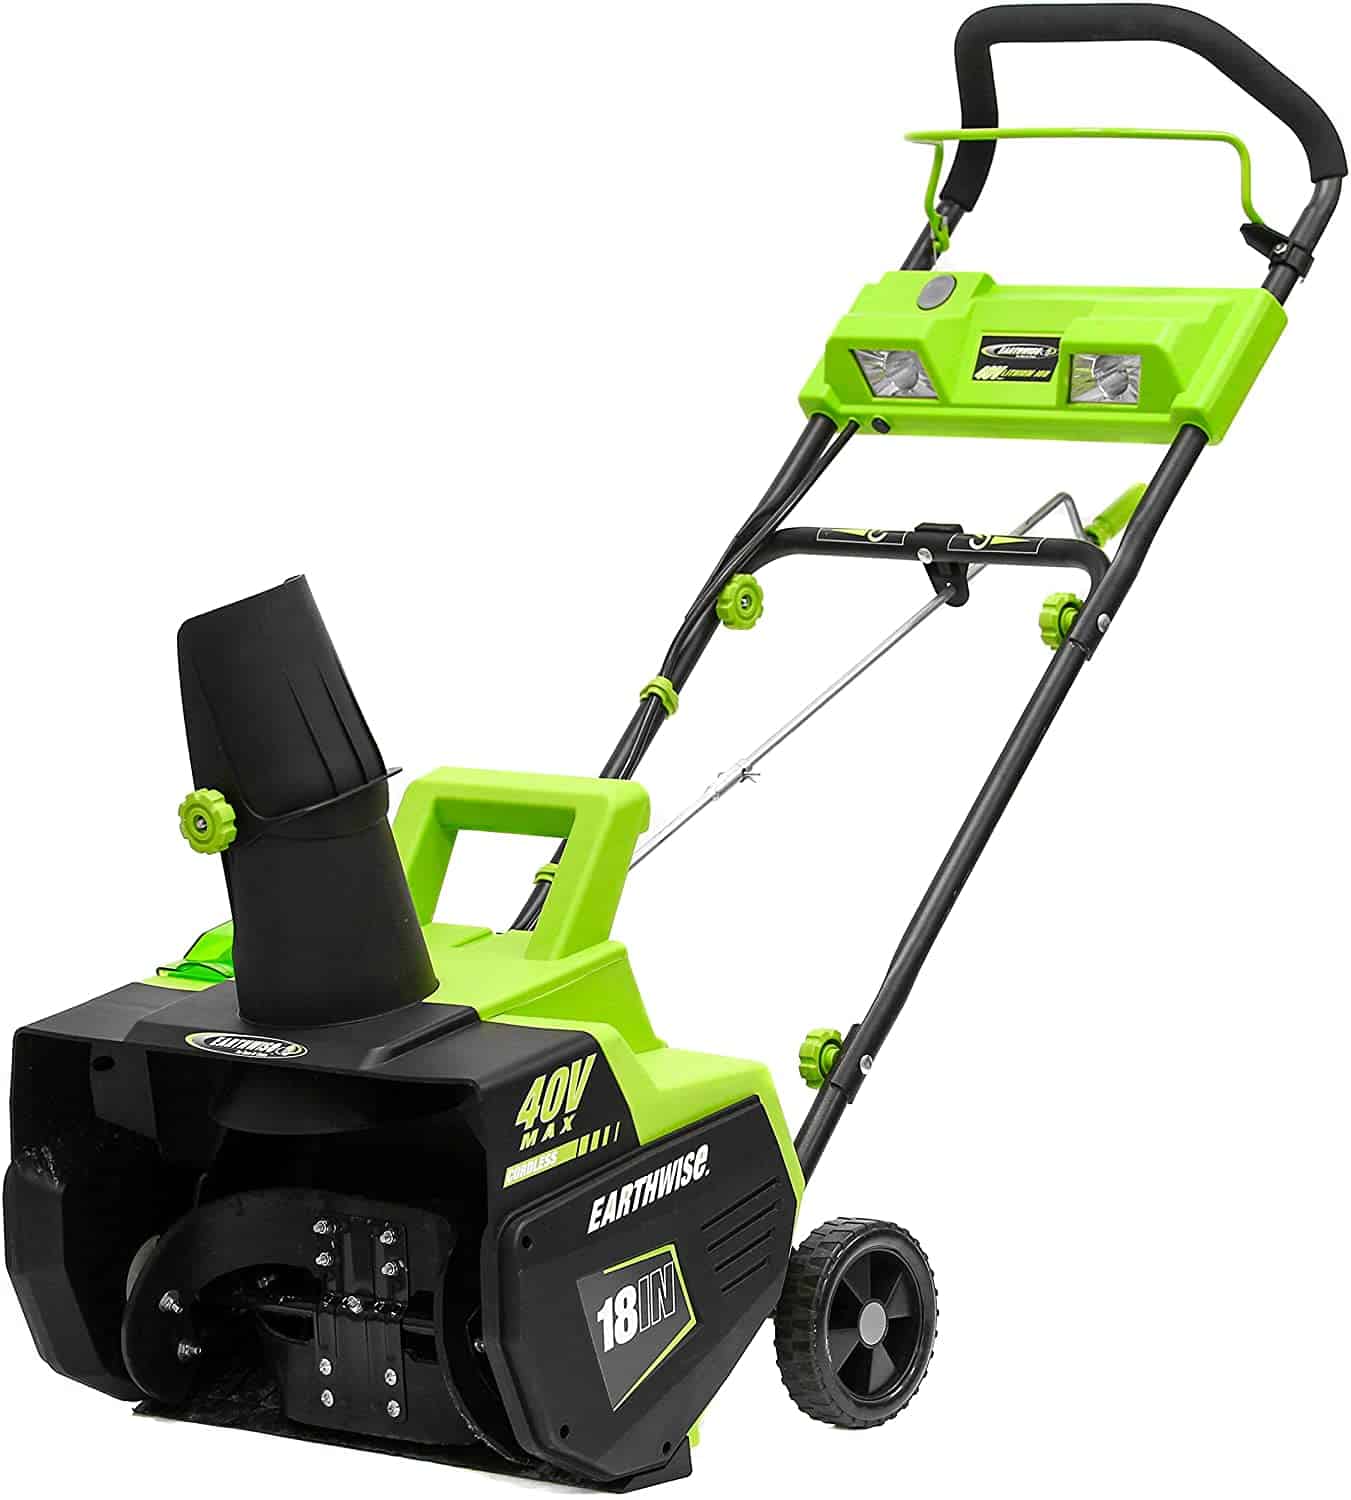 Earthwise snow thrower for shoveling snow off driveways